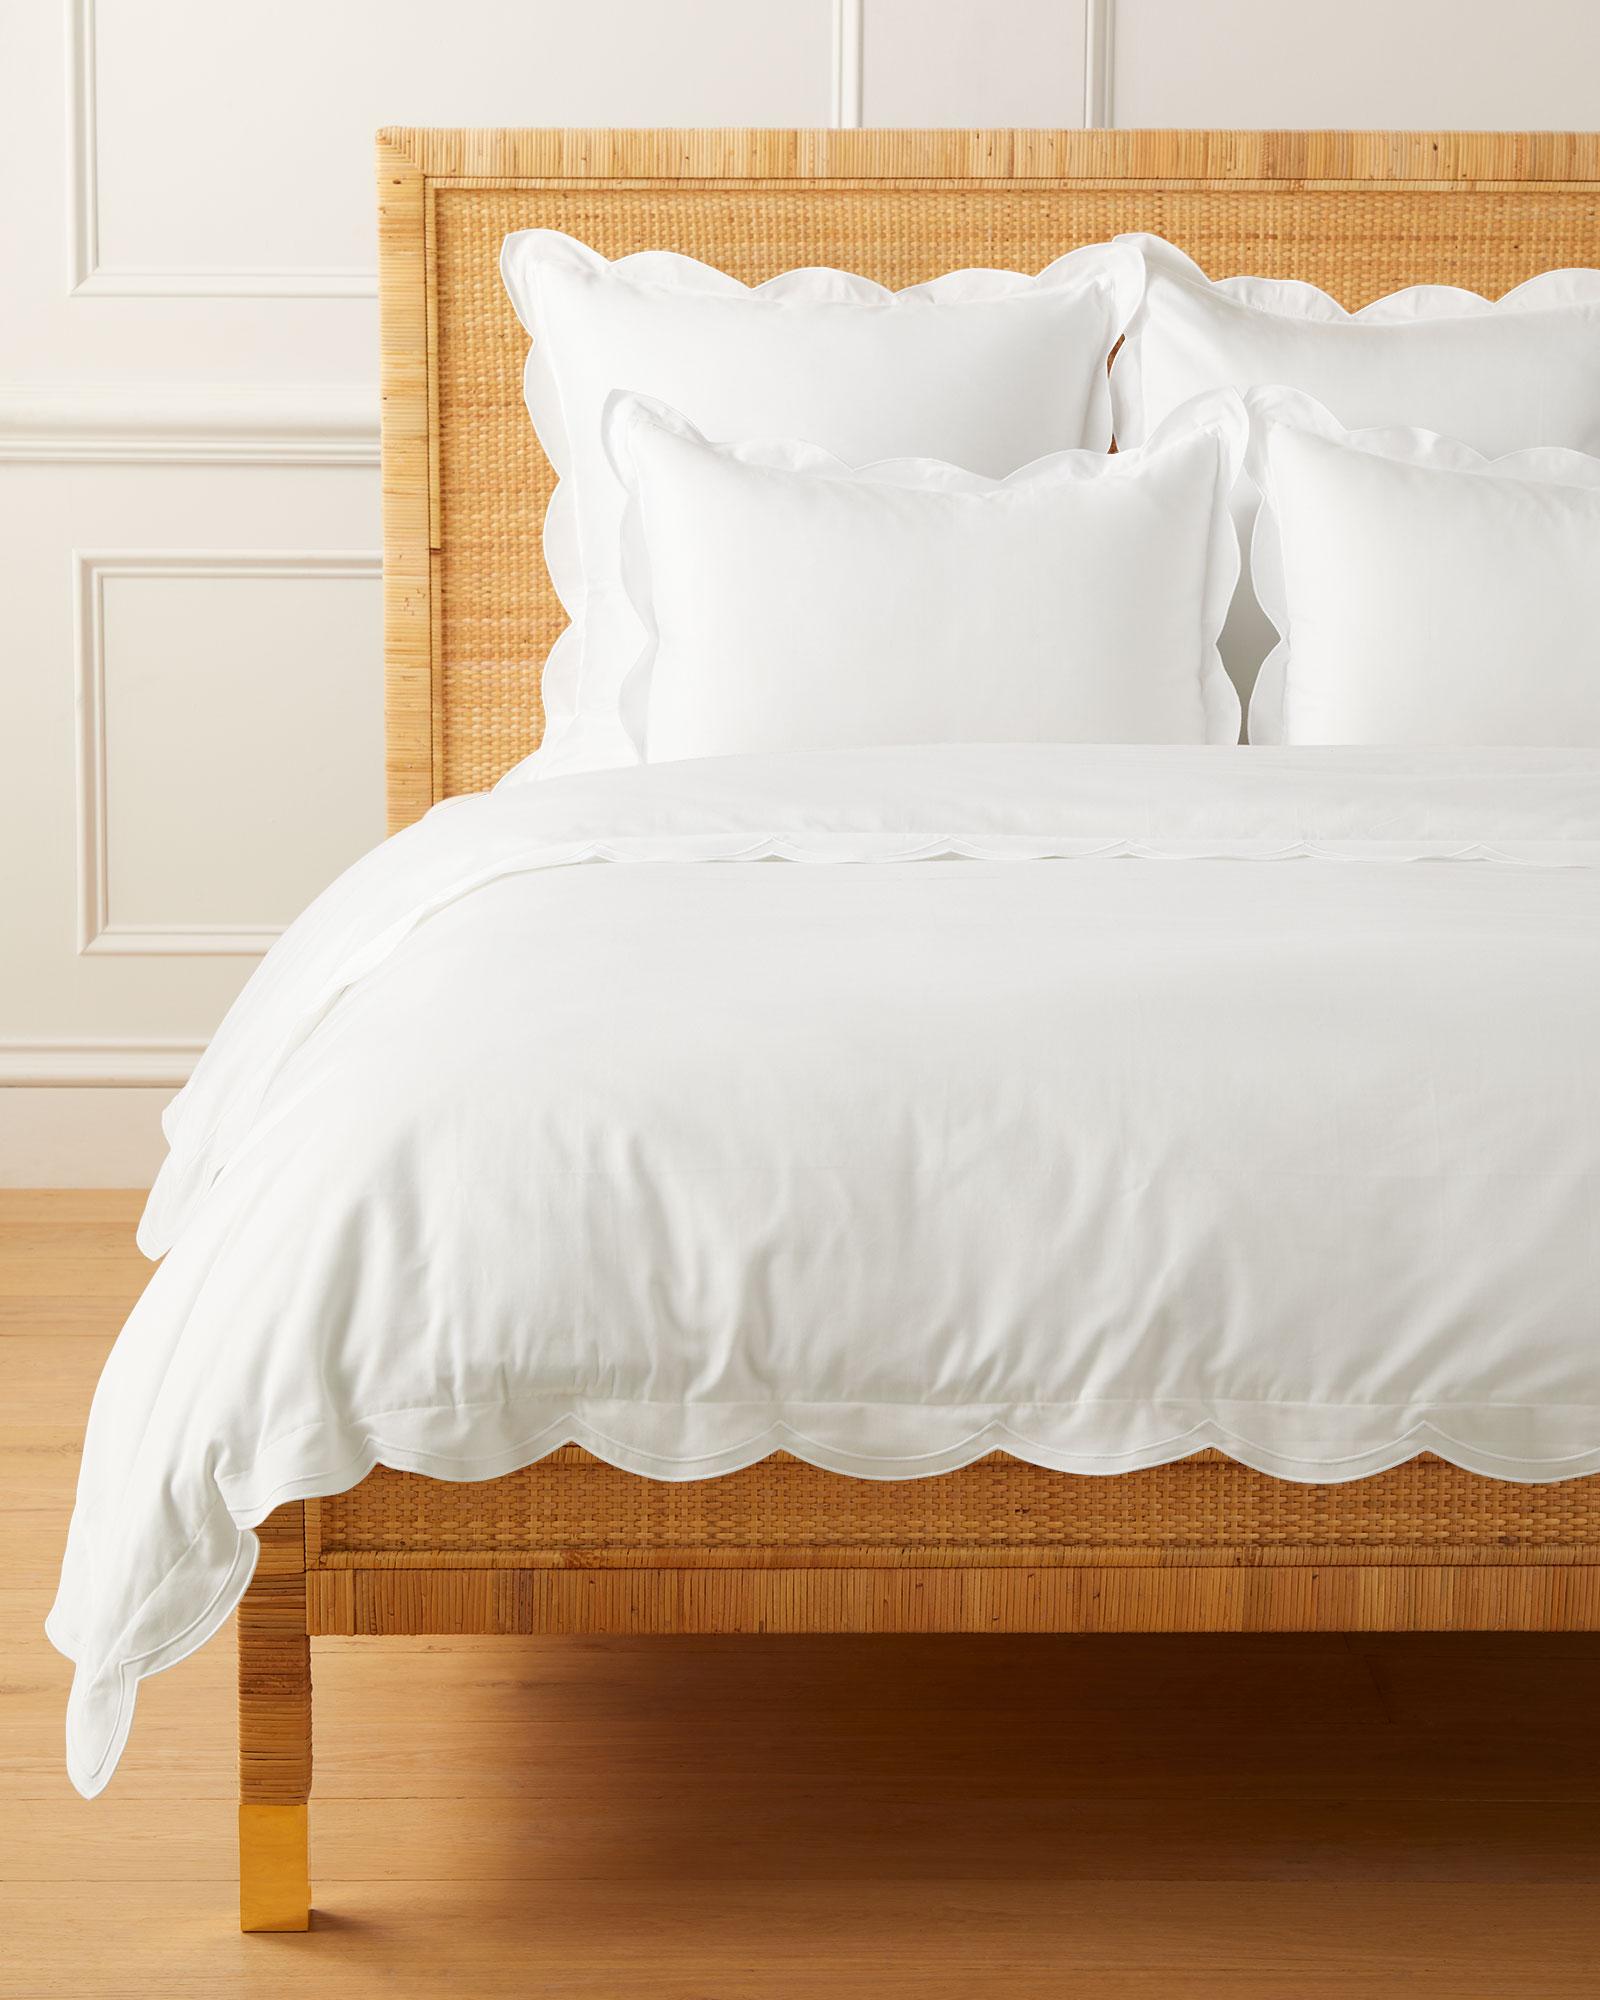 Scallop Sateen Duvet Cover - White - Full/Queen - Cotton – Serena & Lily